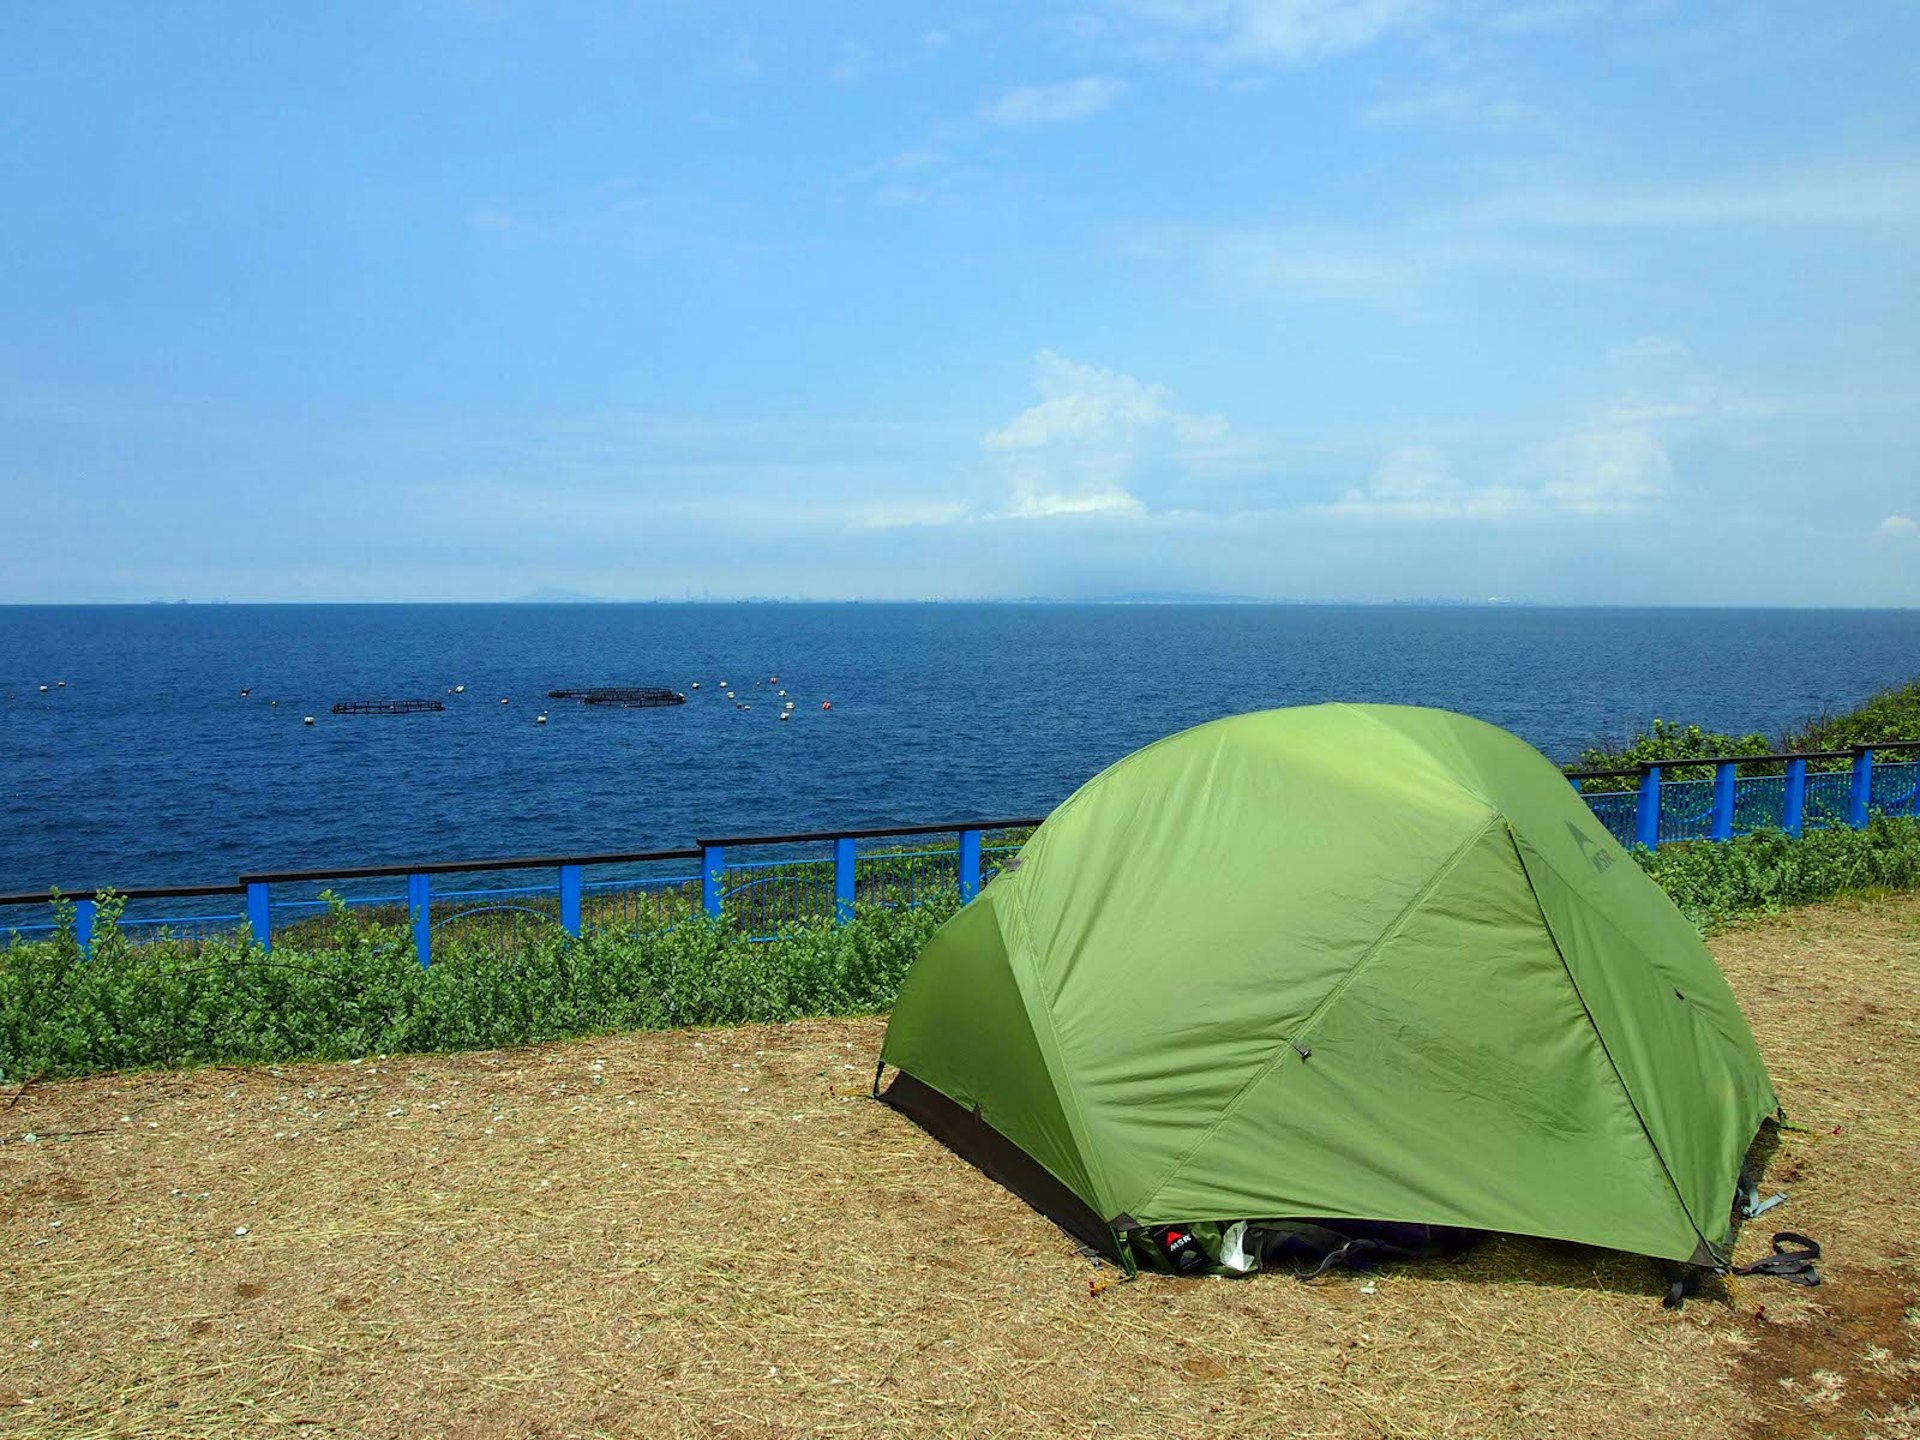 A green tent pitched on a patch of dirt overlooking the sea. Camping is popular on Little Liuchiu and offers amazing views © Tess Humphrys / Lonely Planet